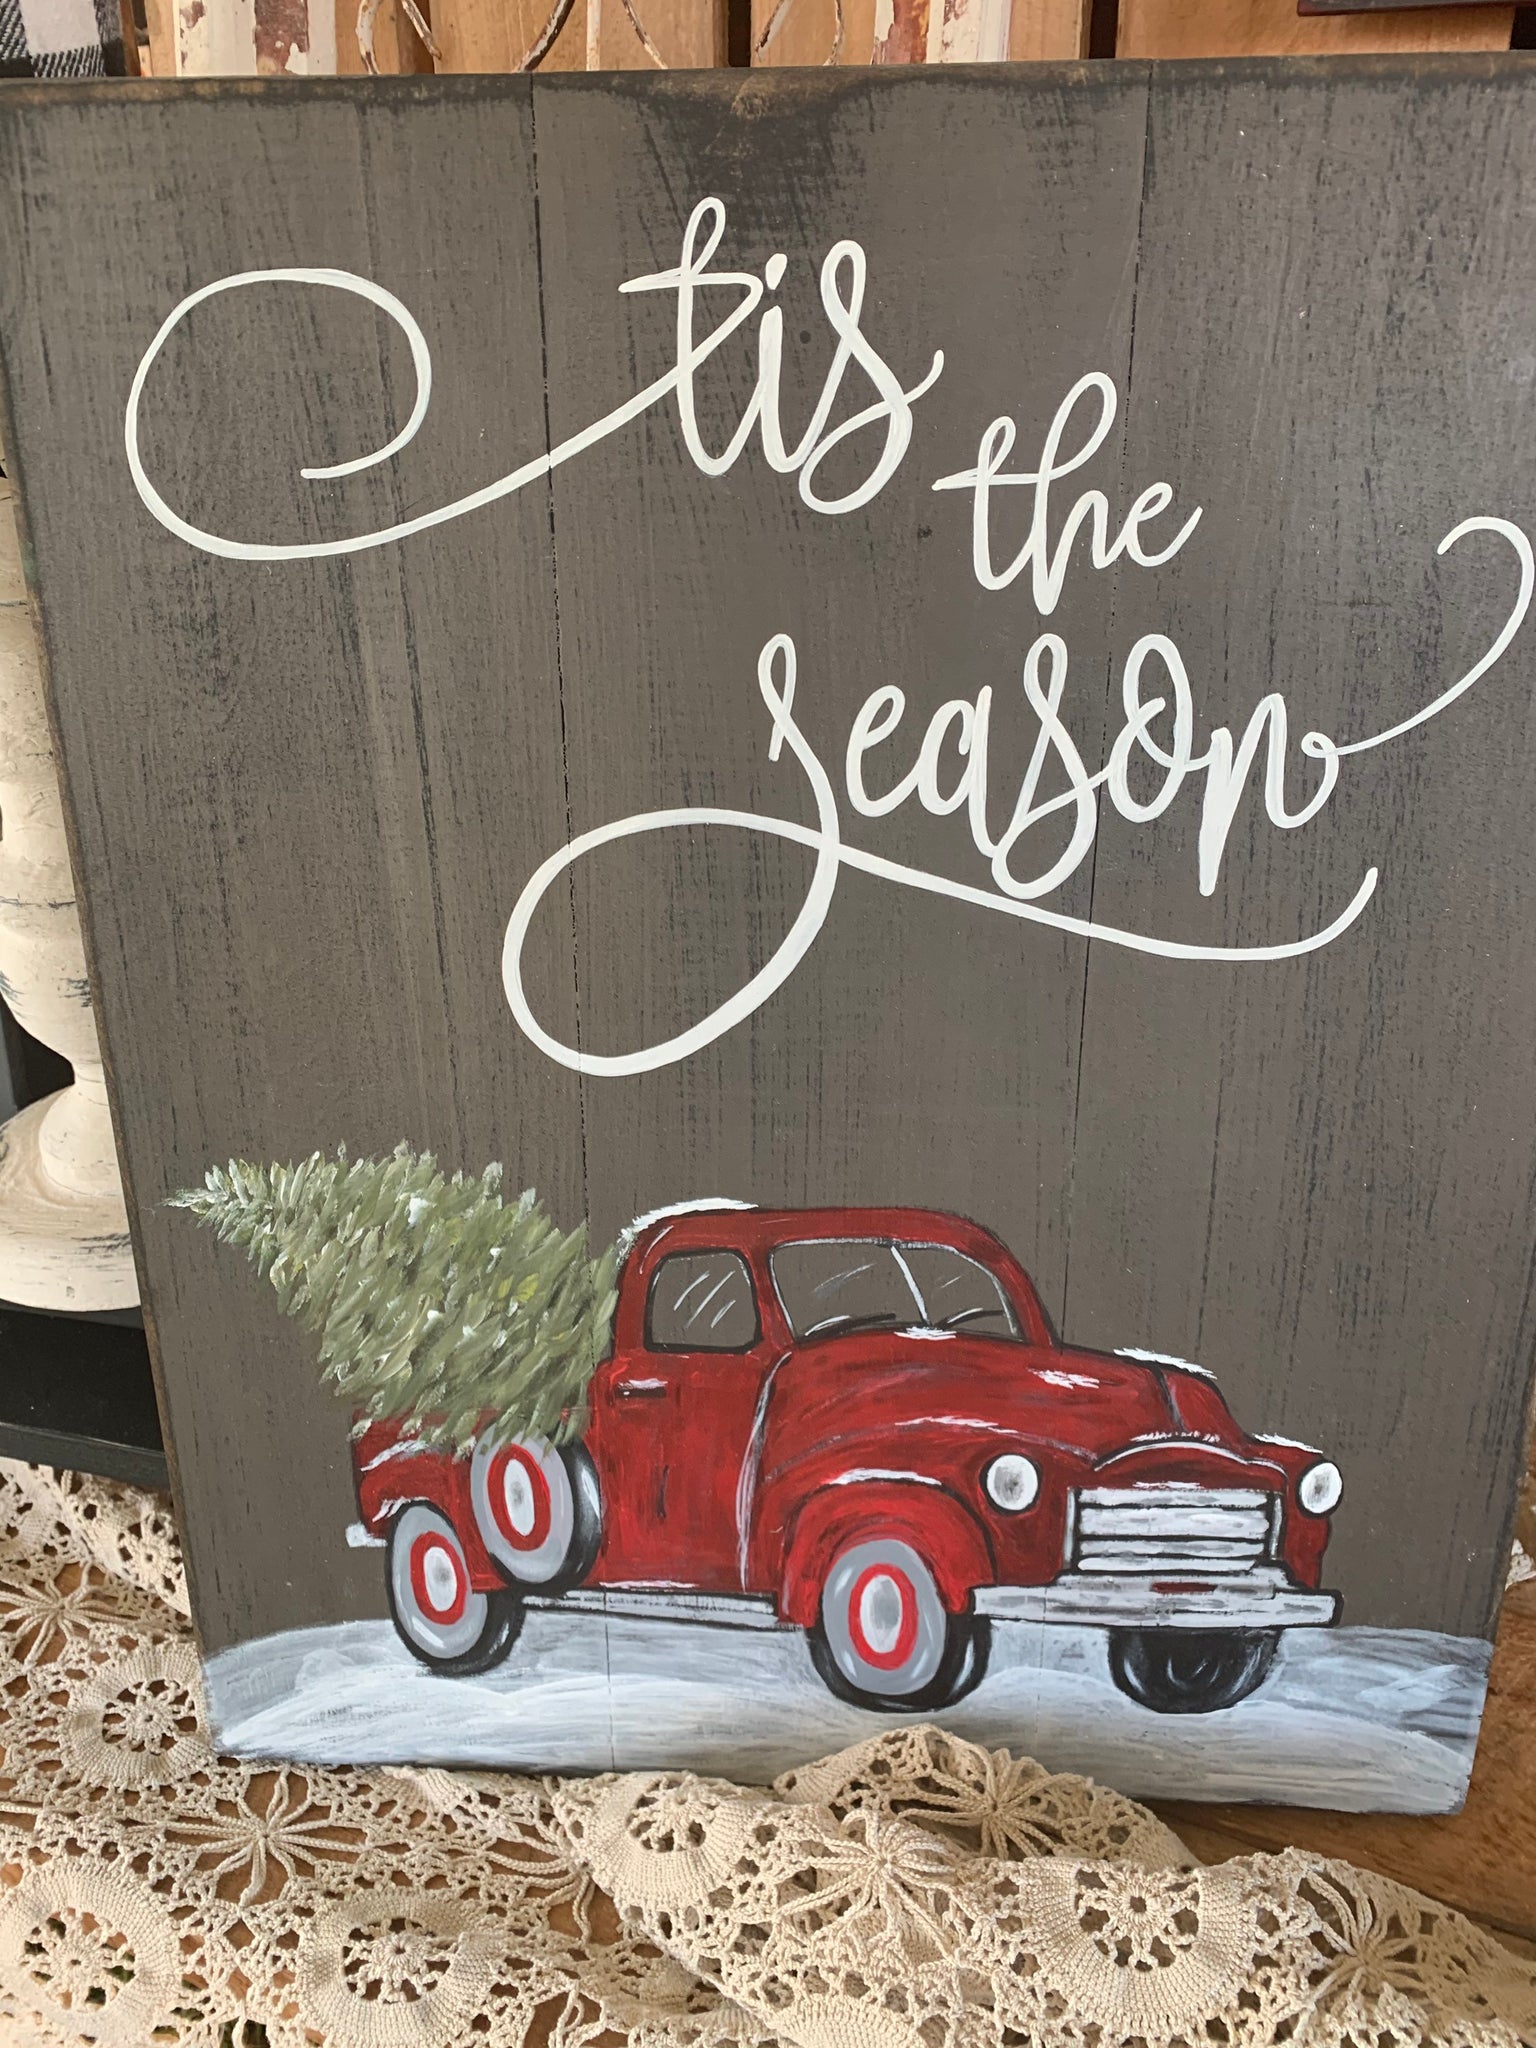 Tis the season hand painted little red vintage truck with Christmas tree  farmhouse style wood sign, porch or mantle decor